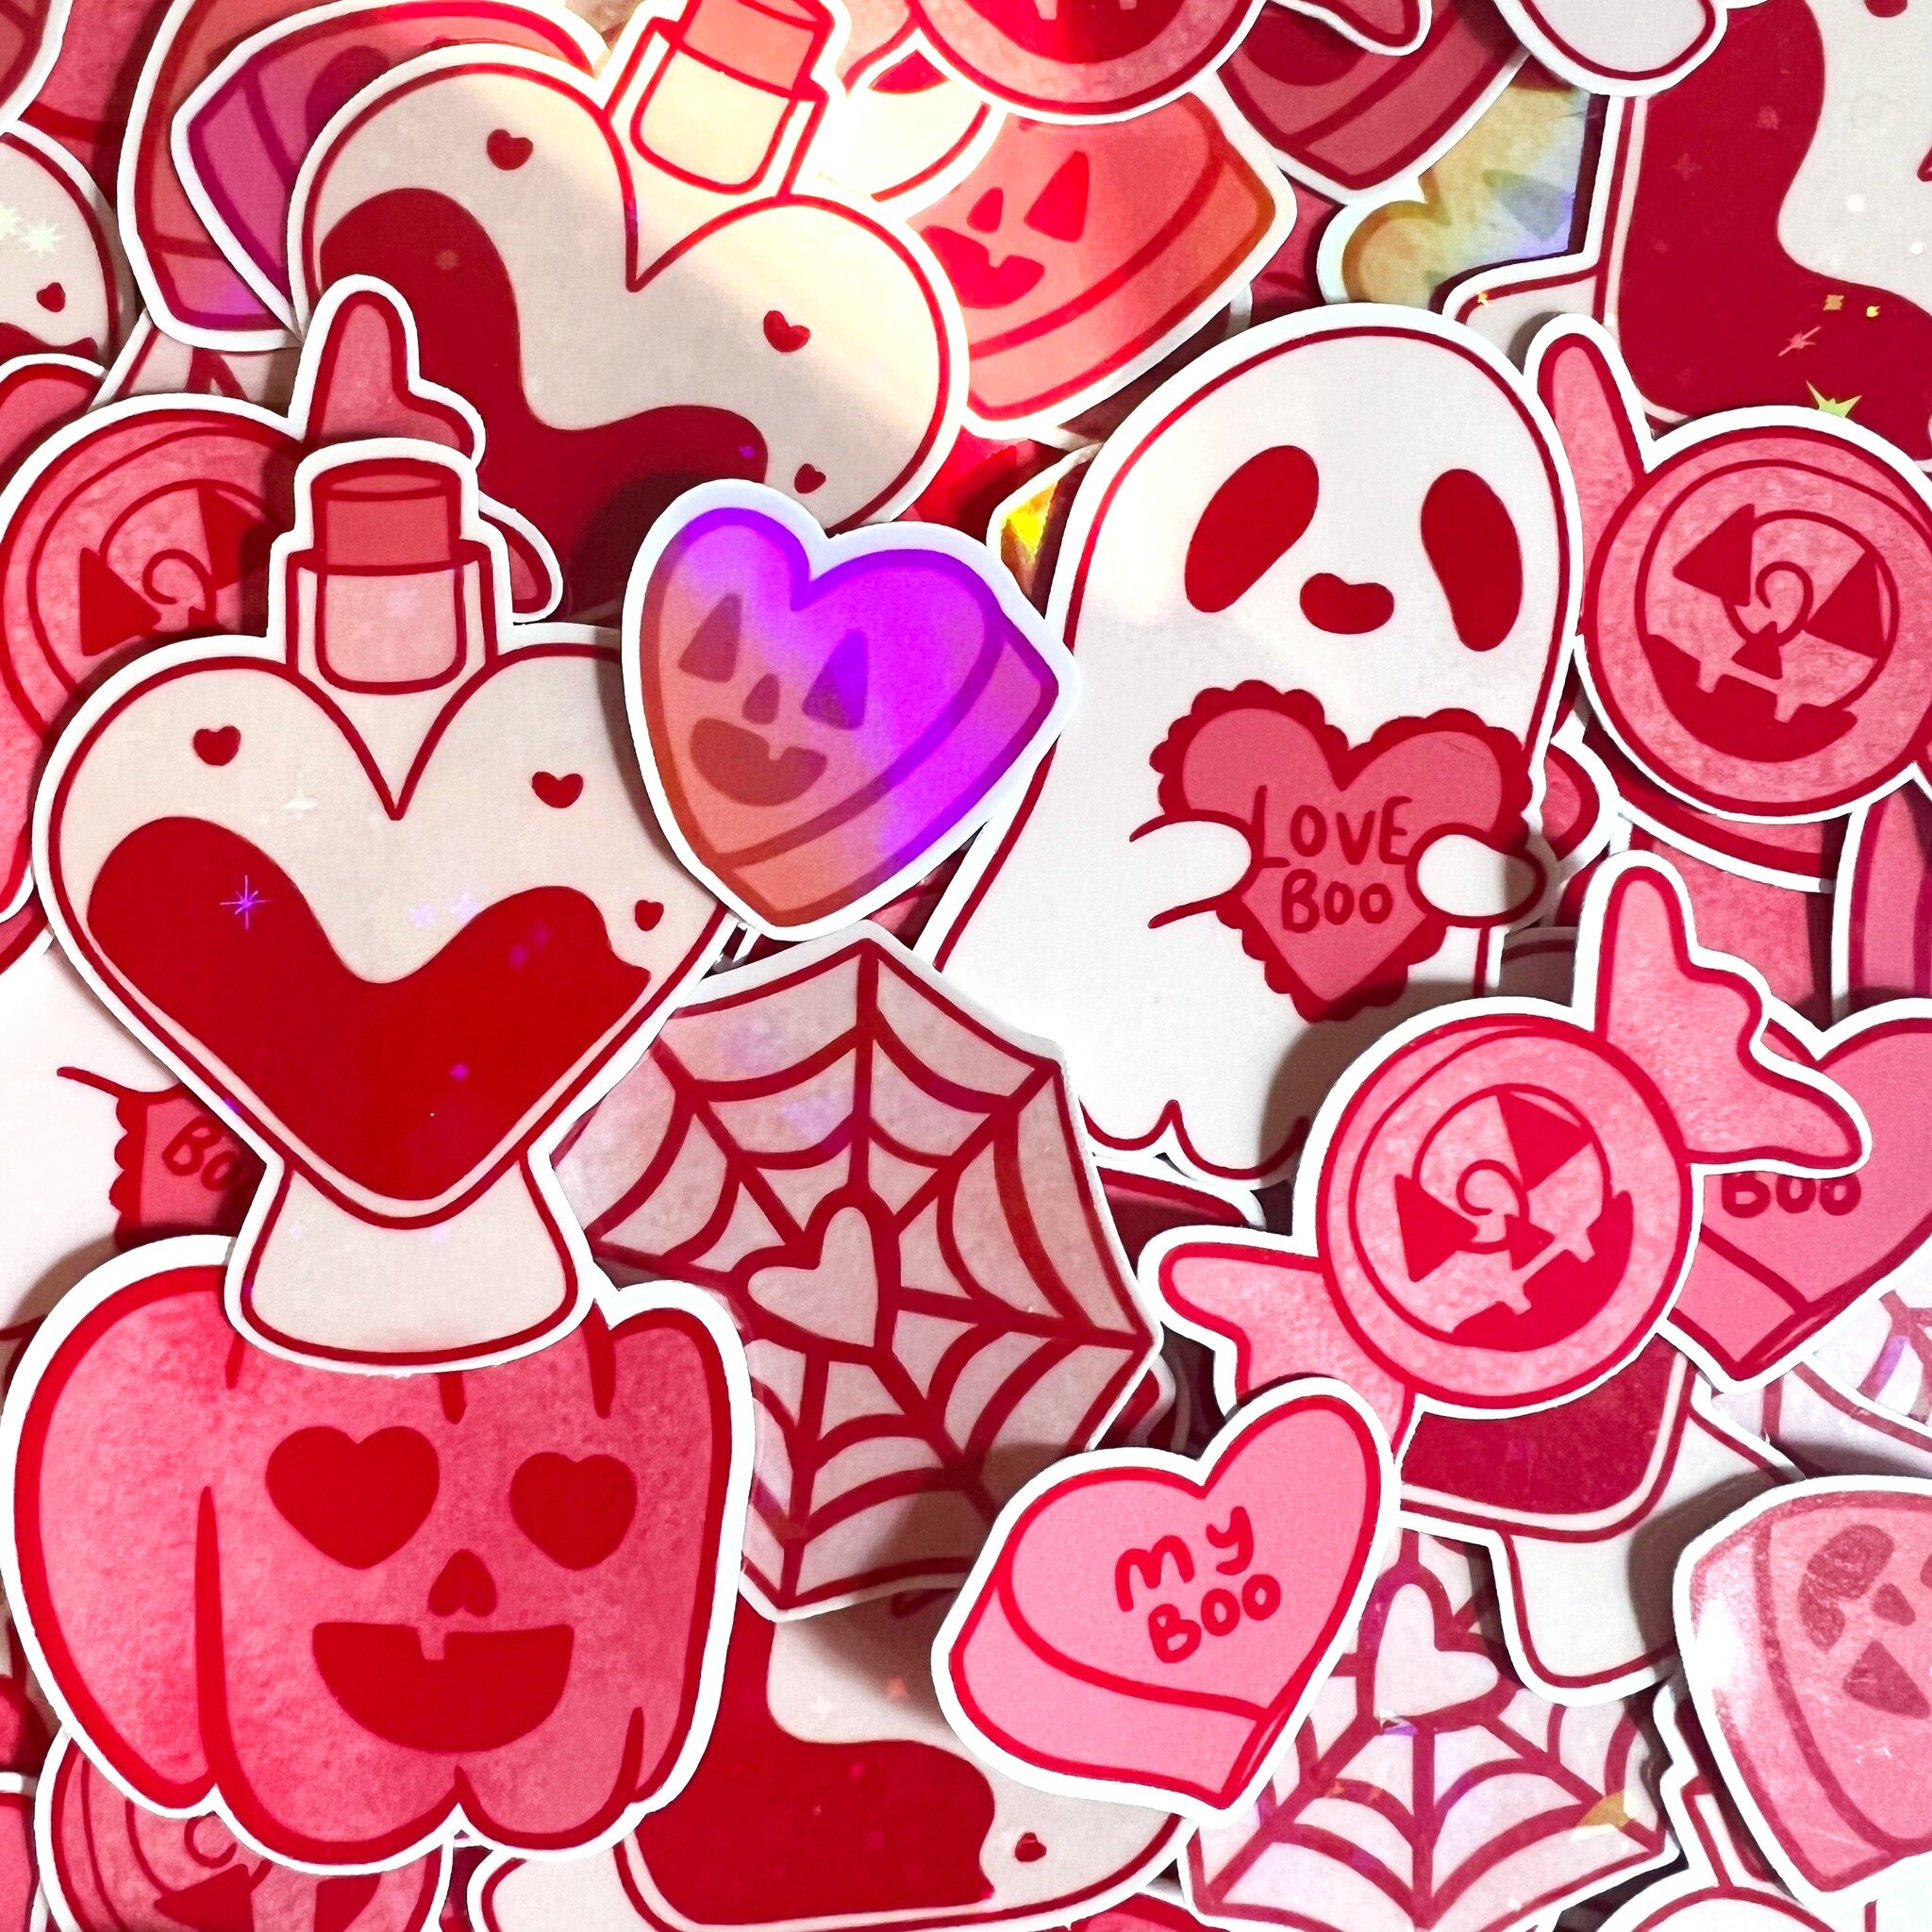 TWO new sticker sets just in time for Halloween! The Hearts &amp; Haunts and Groovy Halloween collections are up on my shop now 🧡💕💜
#stickershop #cutestickers #handmadestickers #vinylstickers #shopsmallbiz #shoplocalartists #shoplocalcincinnati #c